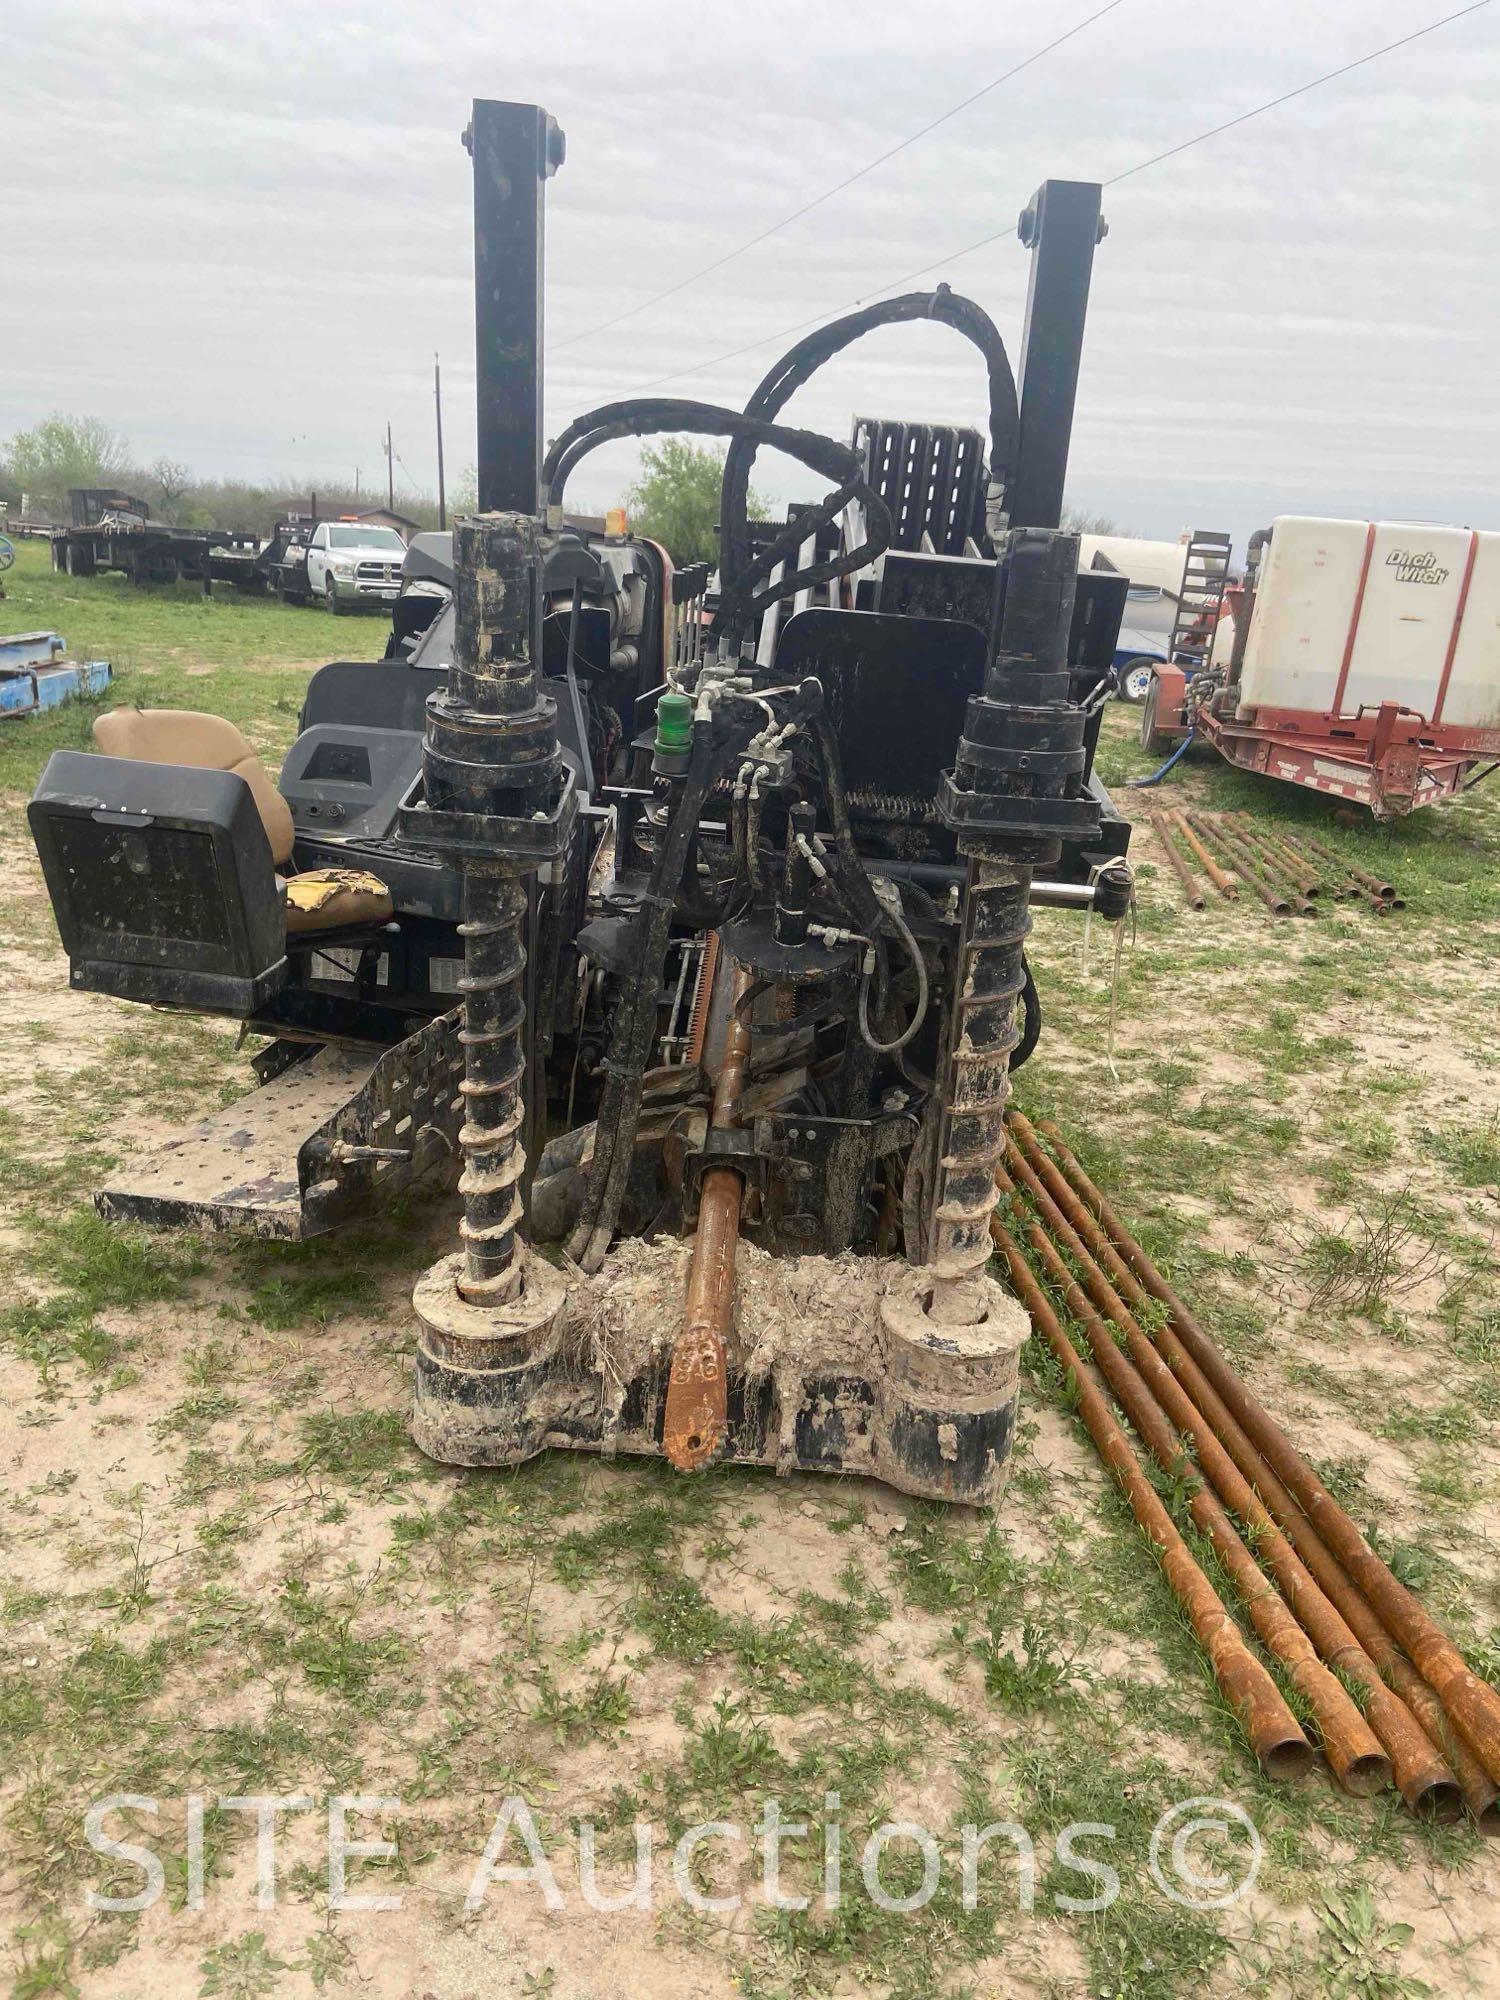 2017 Ditch Witch JT30 All Terrain Directional Drill